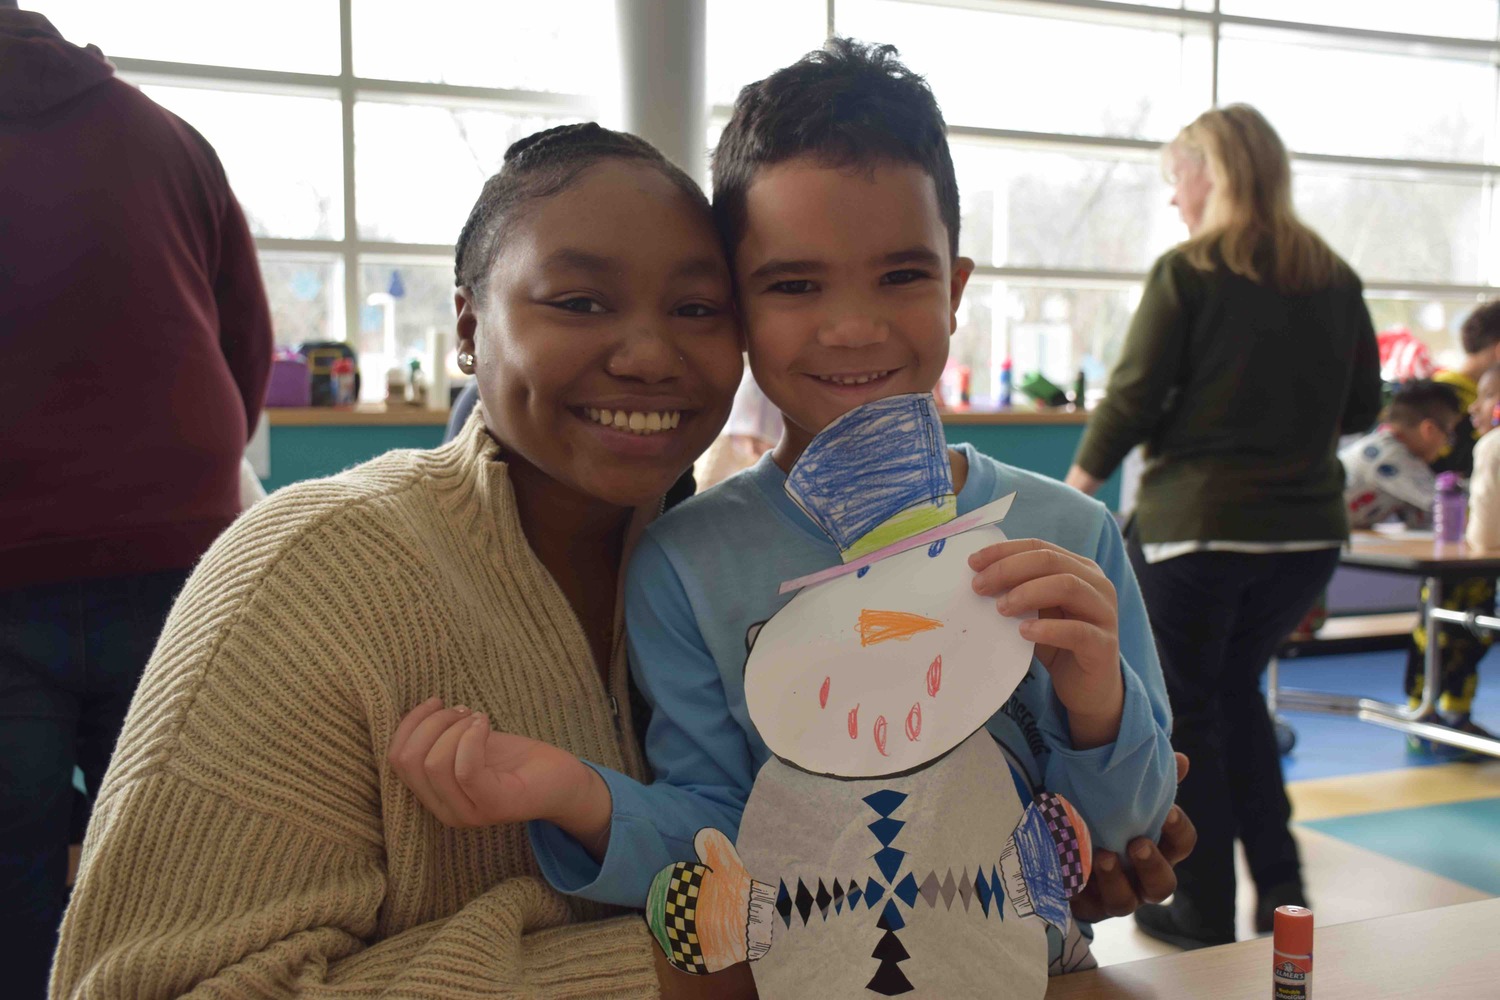 Kayson Coffey, a first grader at Tuttle Avenue Elementary School, made snowman art
with his sister, Tayah Coffey, during the school’s annual Winterfest. COURTESY EASTPORT-SOUTH MANOR SCHOOL DISTRICT